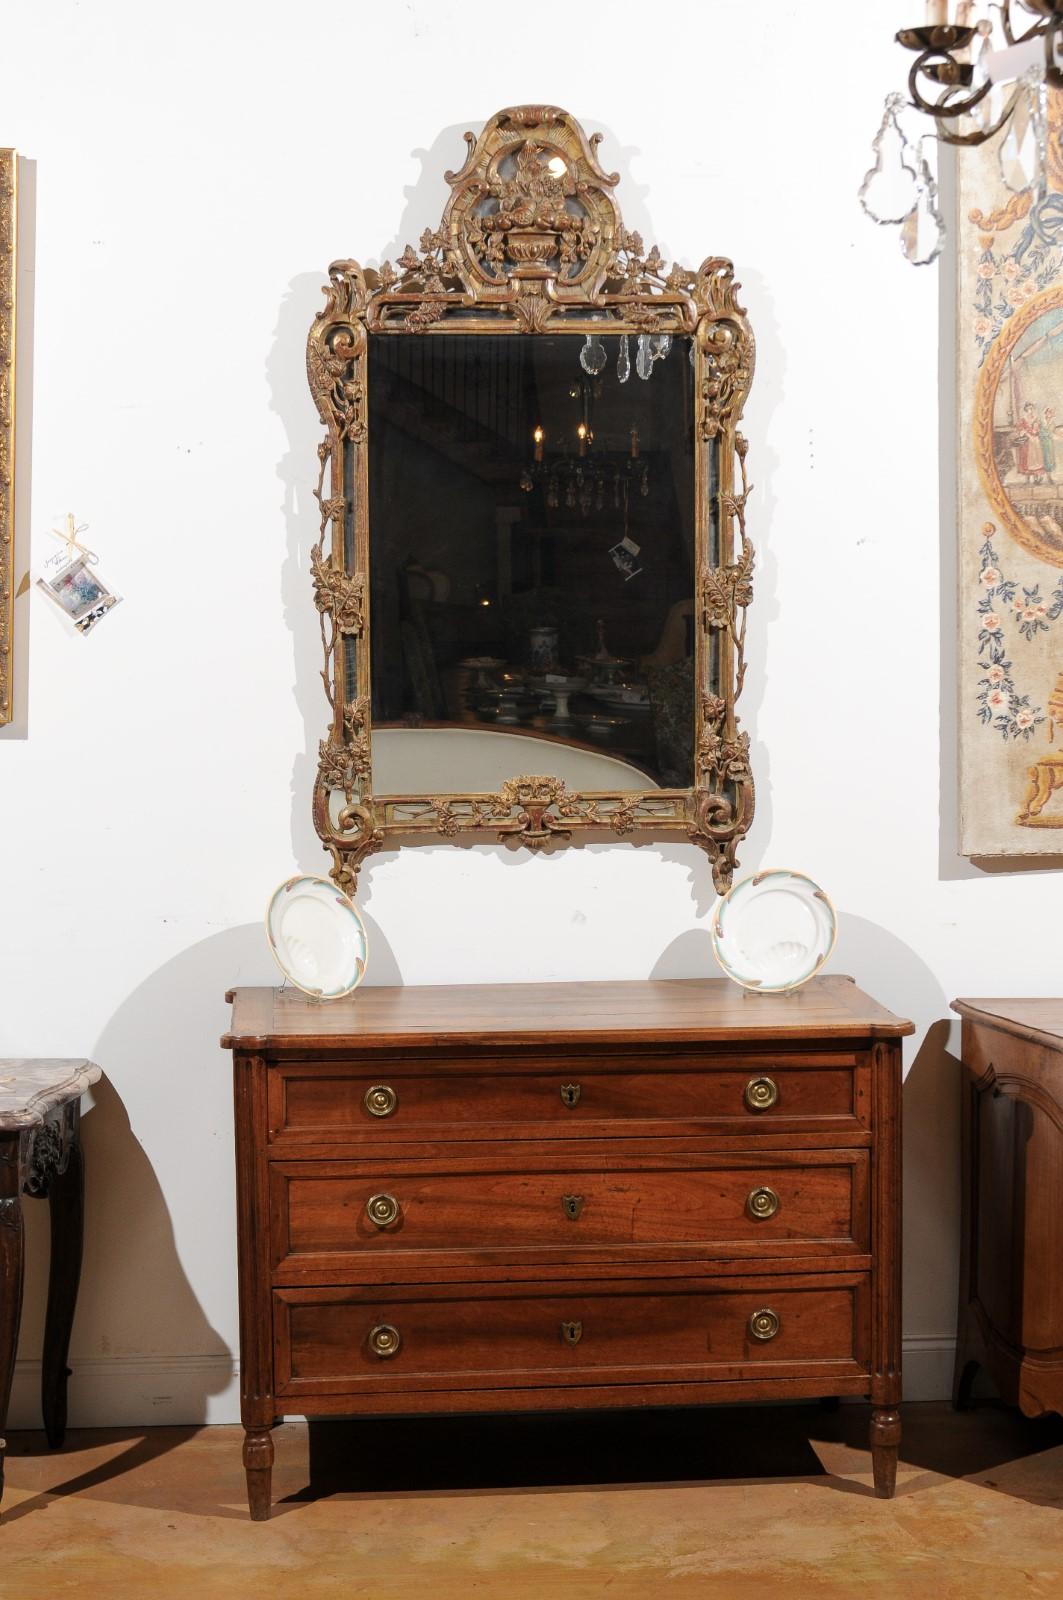 A French Louis XV style carved giltwood mirror from the late 18th-early 19th century, with floral motifs. Born in France after the death of King Louis XVI, this exquisite mirror presents the stylistic characteristics of the Louis XV era. Our eye is